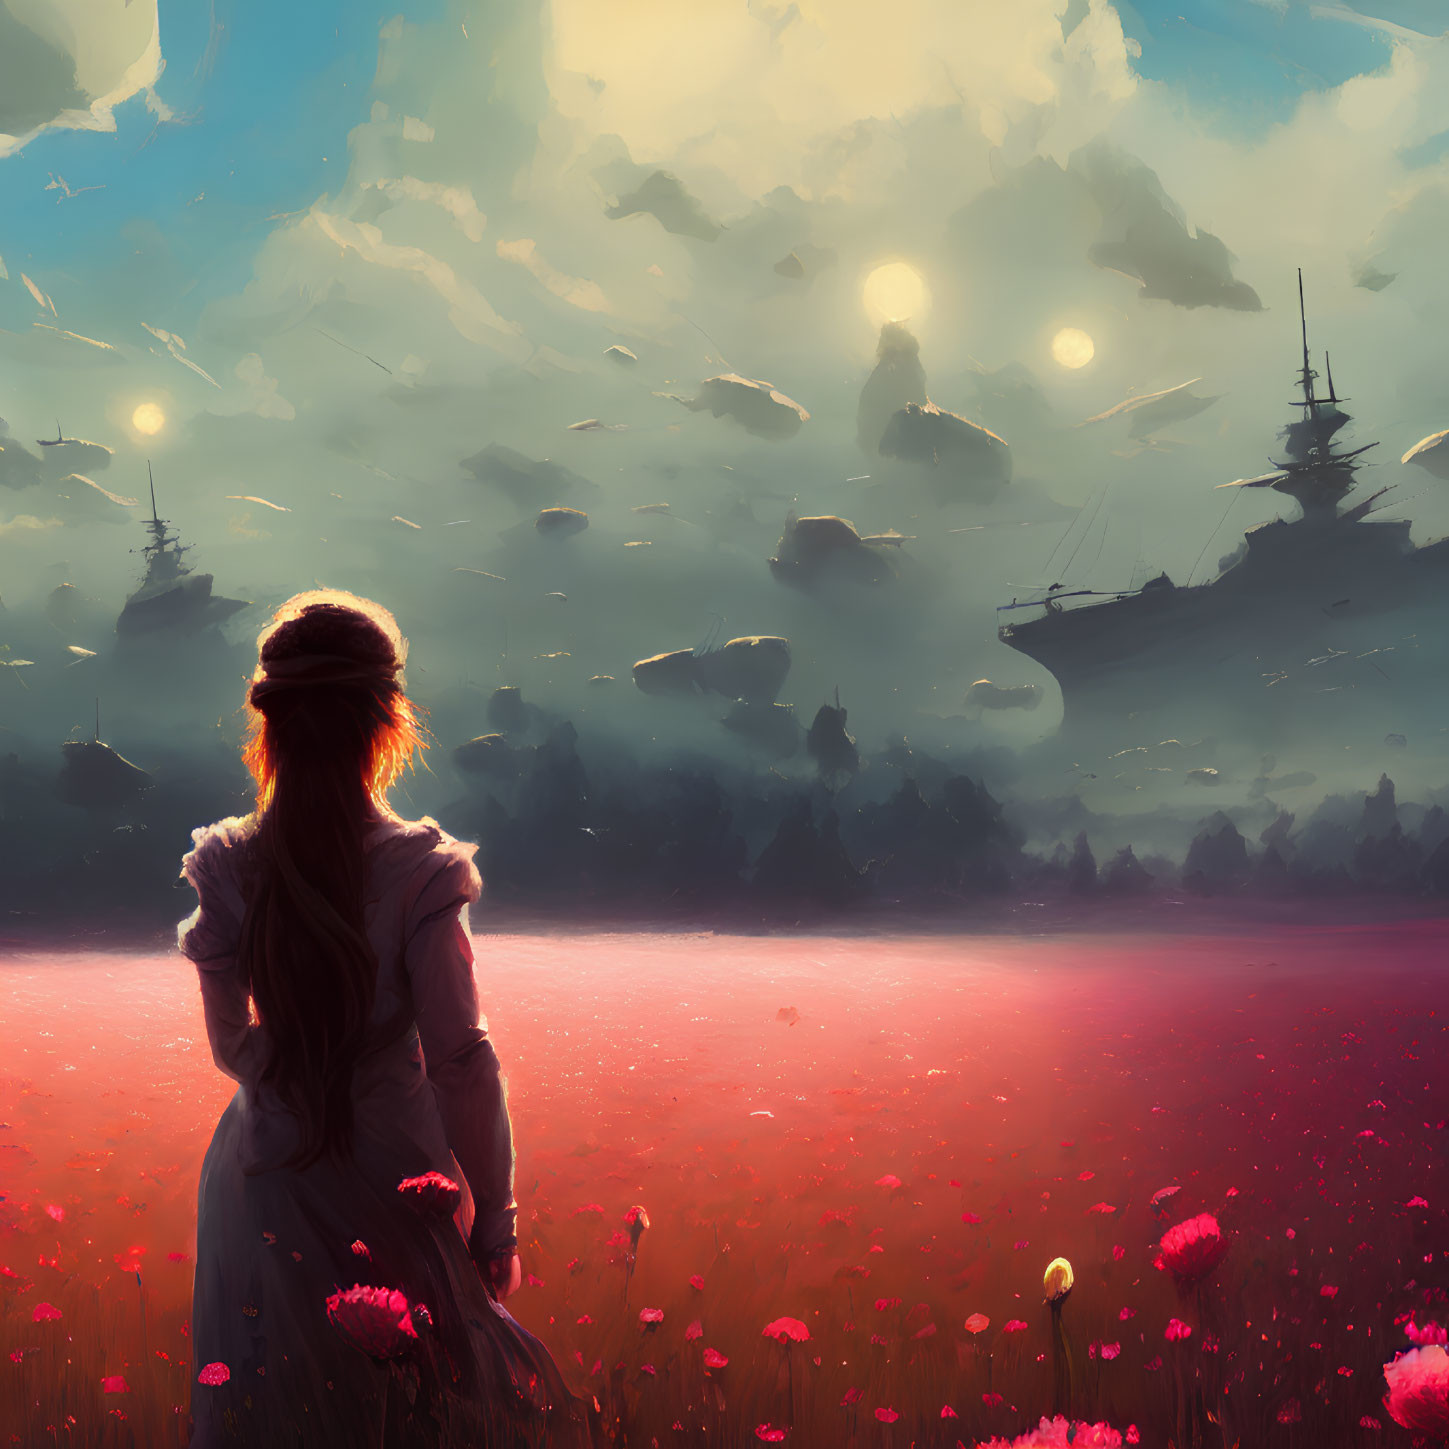 Woman gazes at surreal sky with multiple suns, floating ships, and red flowers field